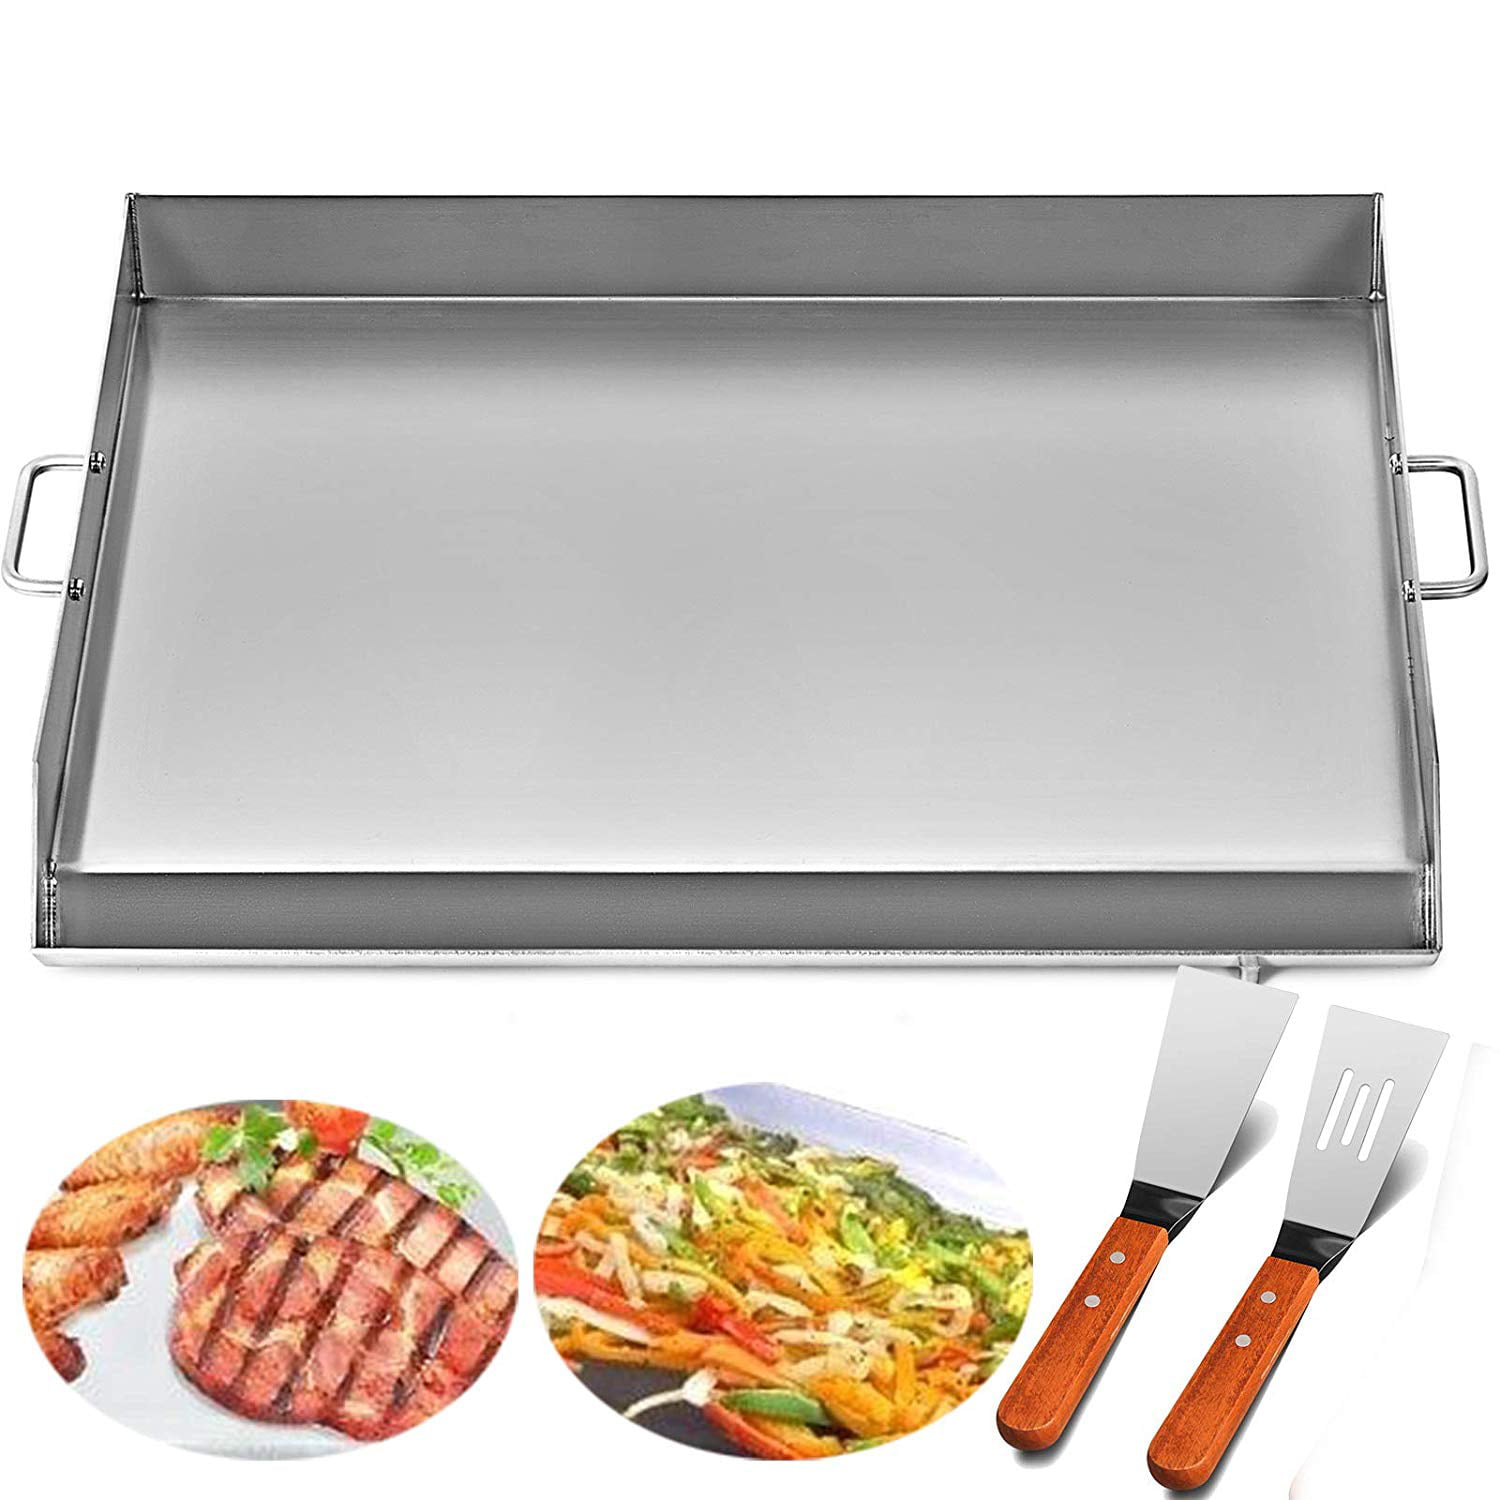 VEVOR 32"x17" Universal Flat Top Griddle Stainless Steel Comal BBQ Stainless Steel Comal Flat Top